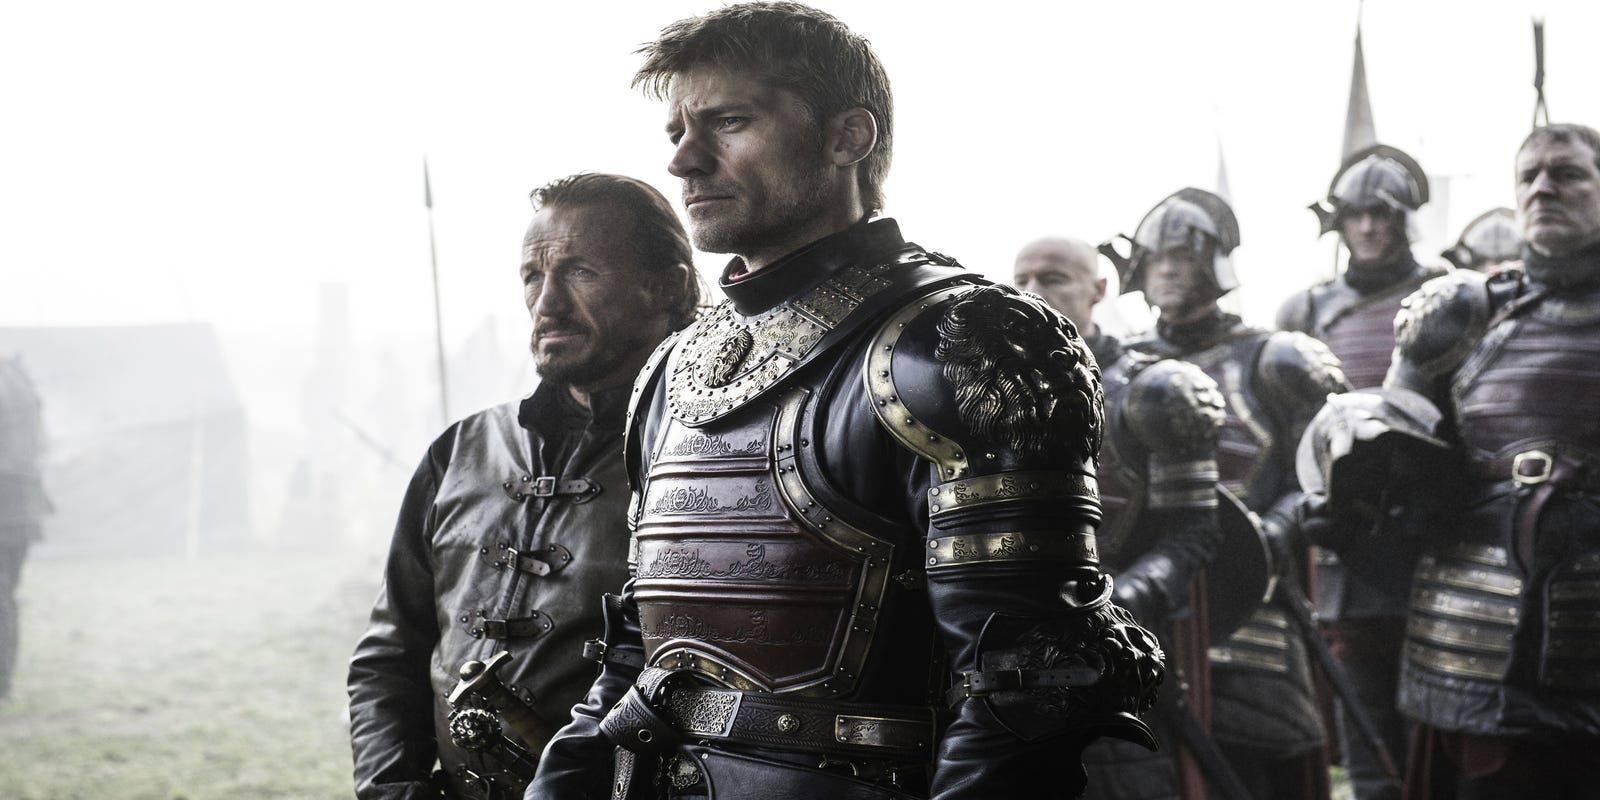 Jaime Lannister And Tyrion Lannister Game Of Thrones 8 Image Wallpapers